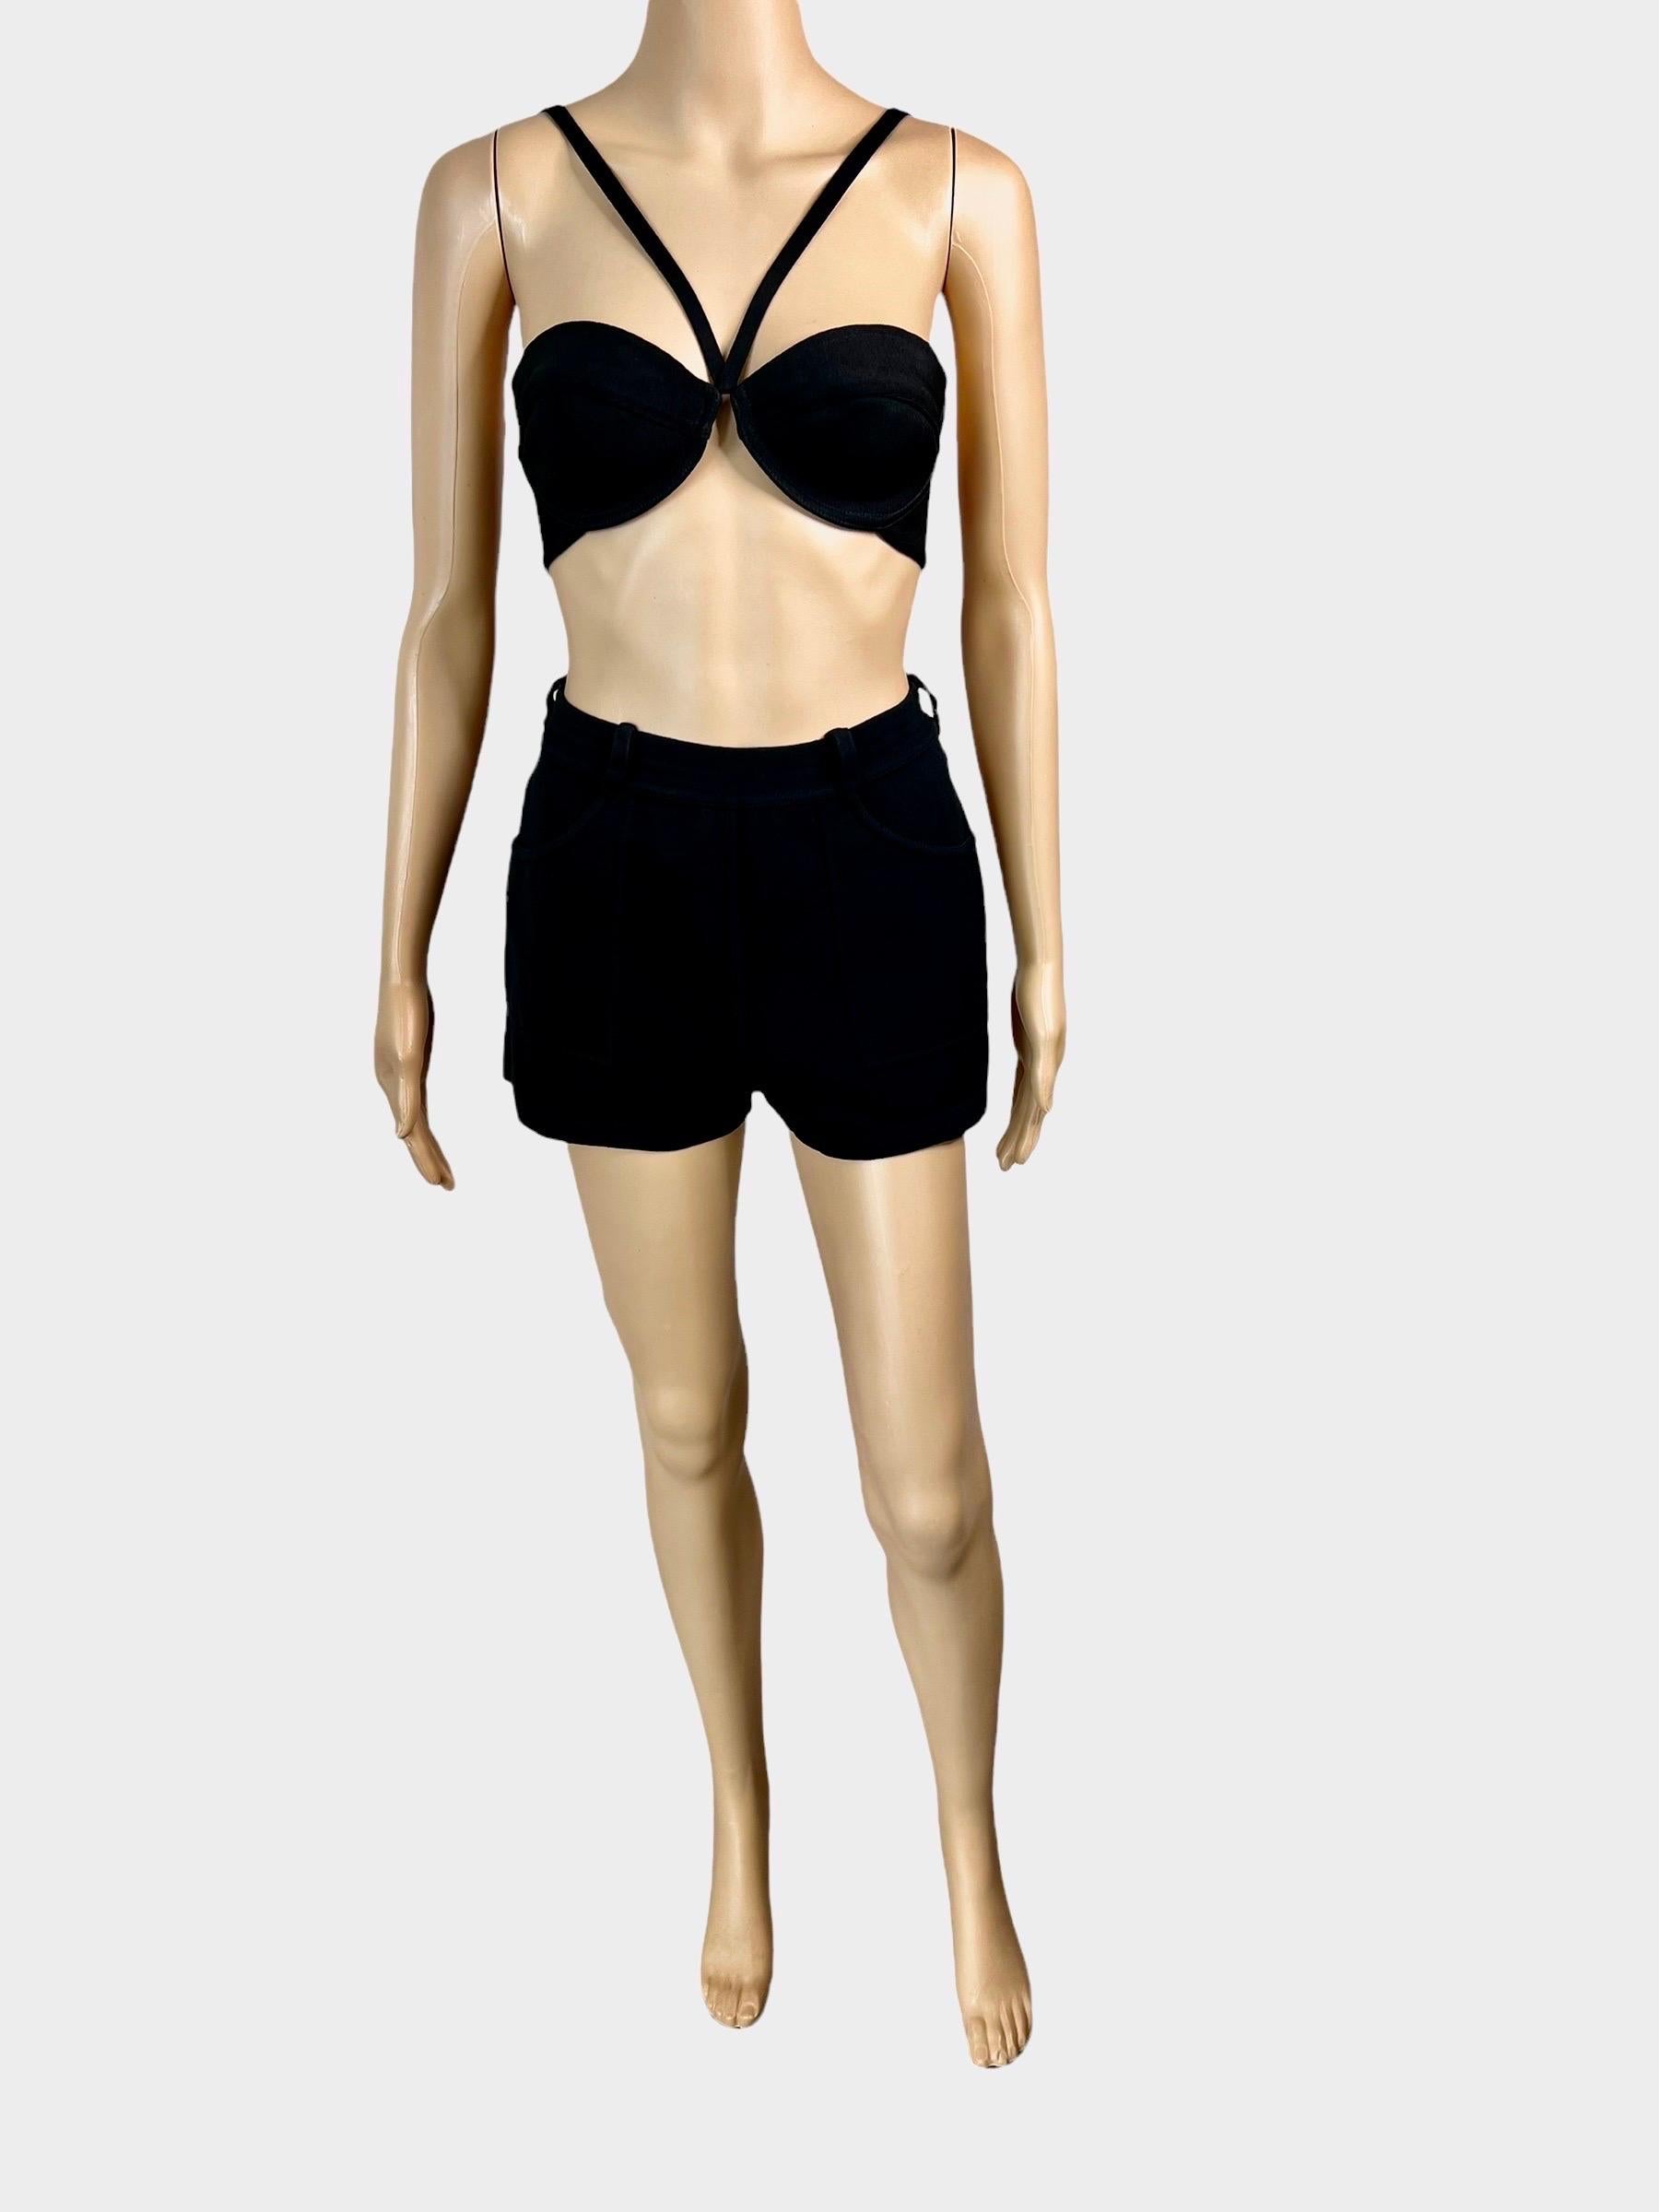 Azzedine Alaia S/S 1990 Vintage Shorts and Bra Bralette Crop Top 2 Piece Set  In Good Condition For Sale In Naples, FL